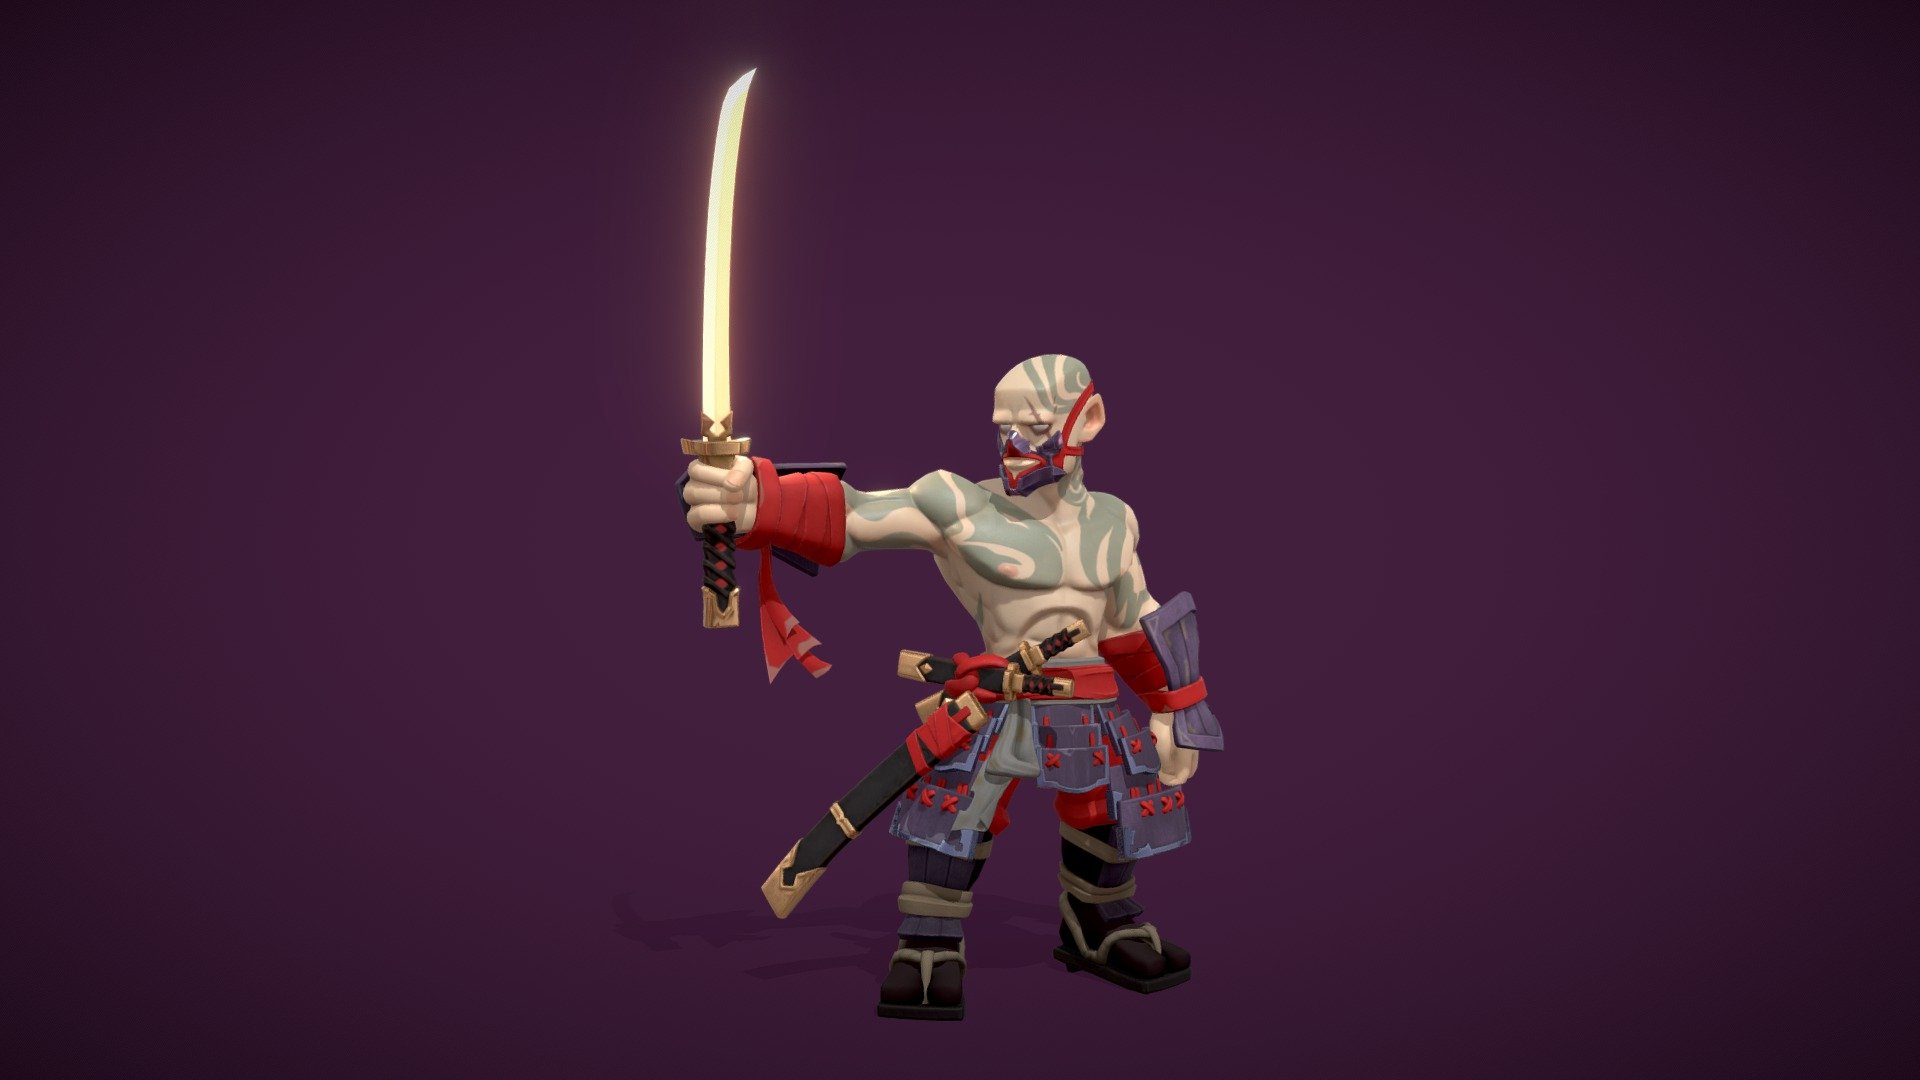 Personal project “Ronin”
Don't be fooled by this warrior's sad appearance, this lone Ronin is capable of slicing through anything with his energy katana.

I had to make a few little changes to the concept because I wanted to model and animate this character as a game model, it still looked to be very close to the original idea.

Modeled in Maya, sculpted and rendered in Blender and textured in Substance Painter.

View full project on Artstastion https://www.artstation.com/artwork/ZeNL41 - Ronin - 3D model by Atilay 3d model